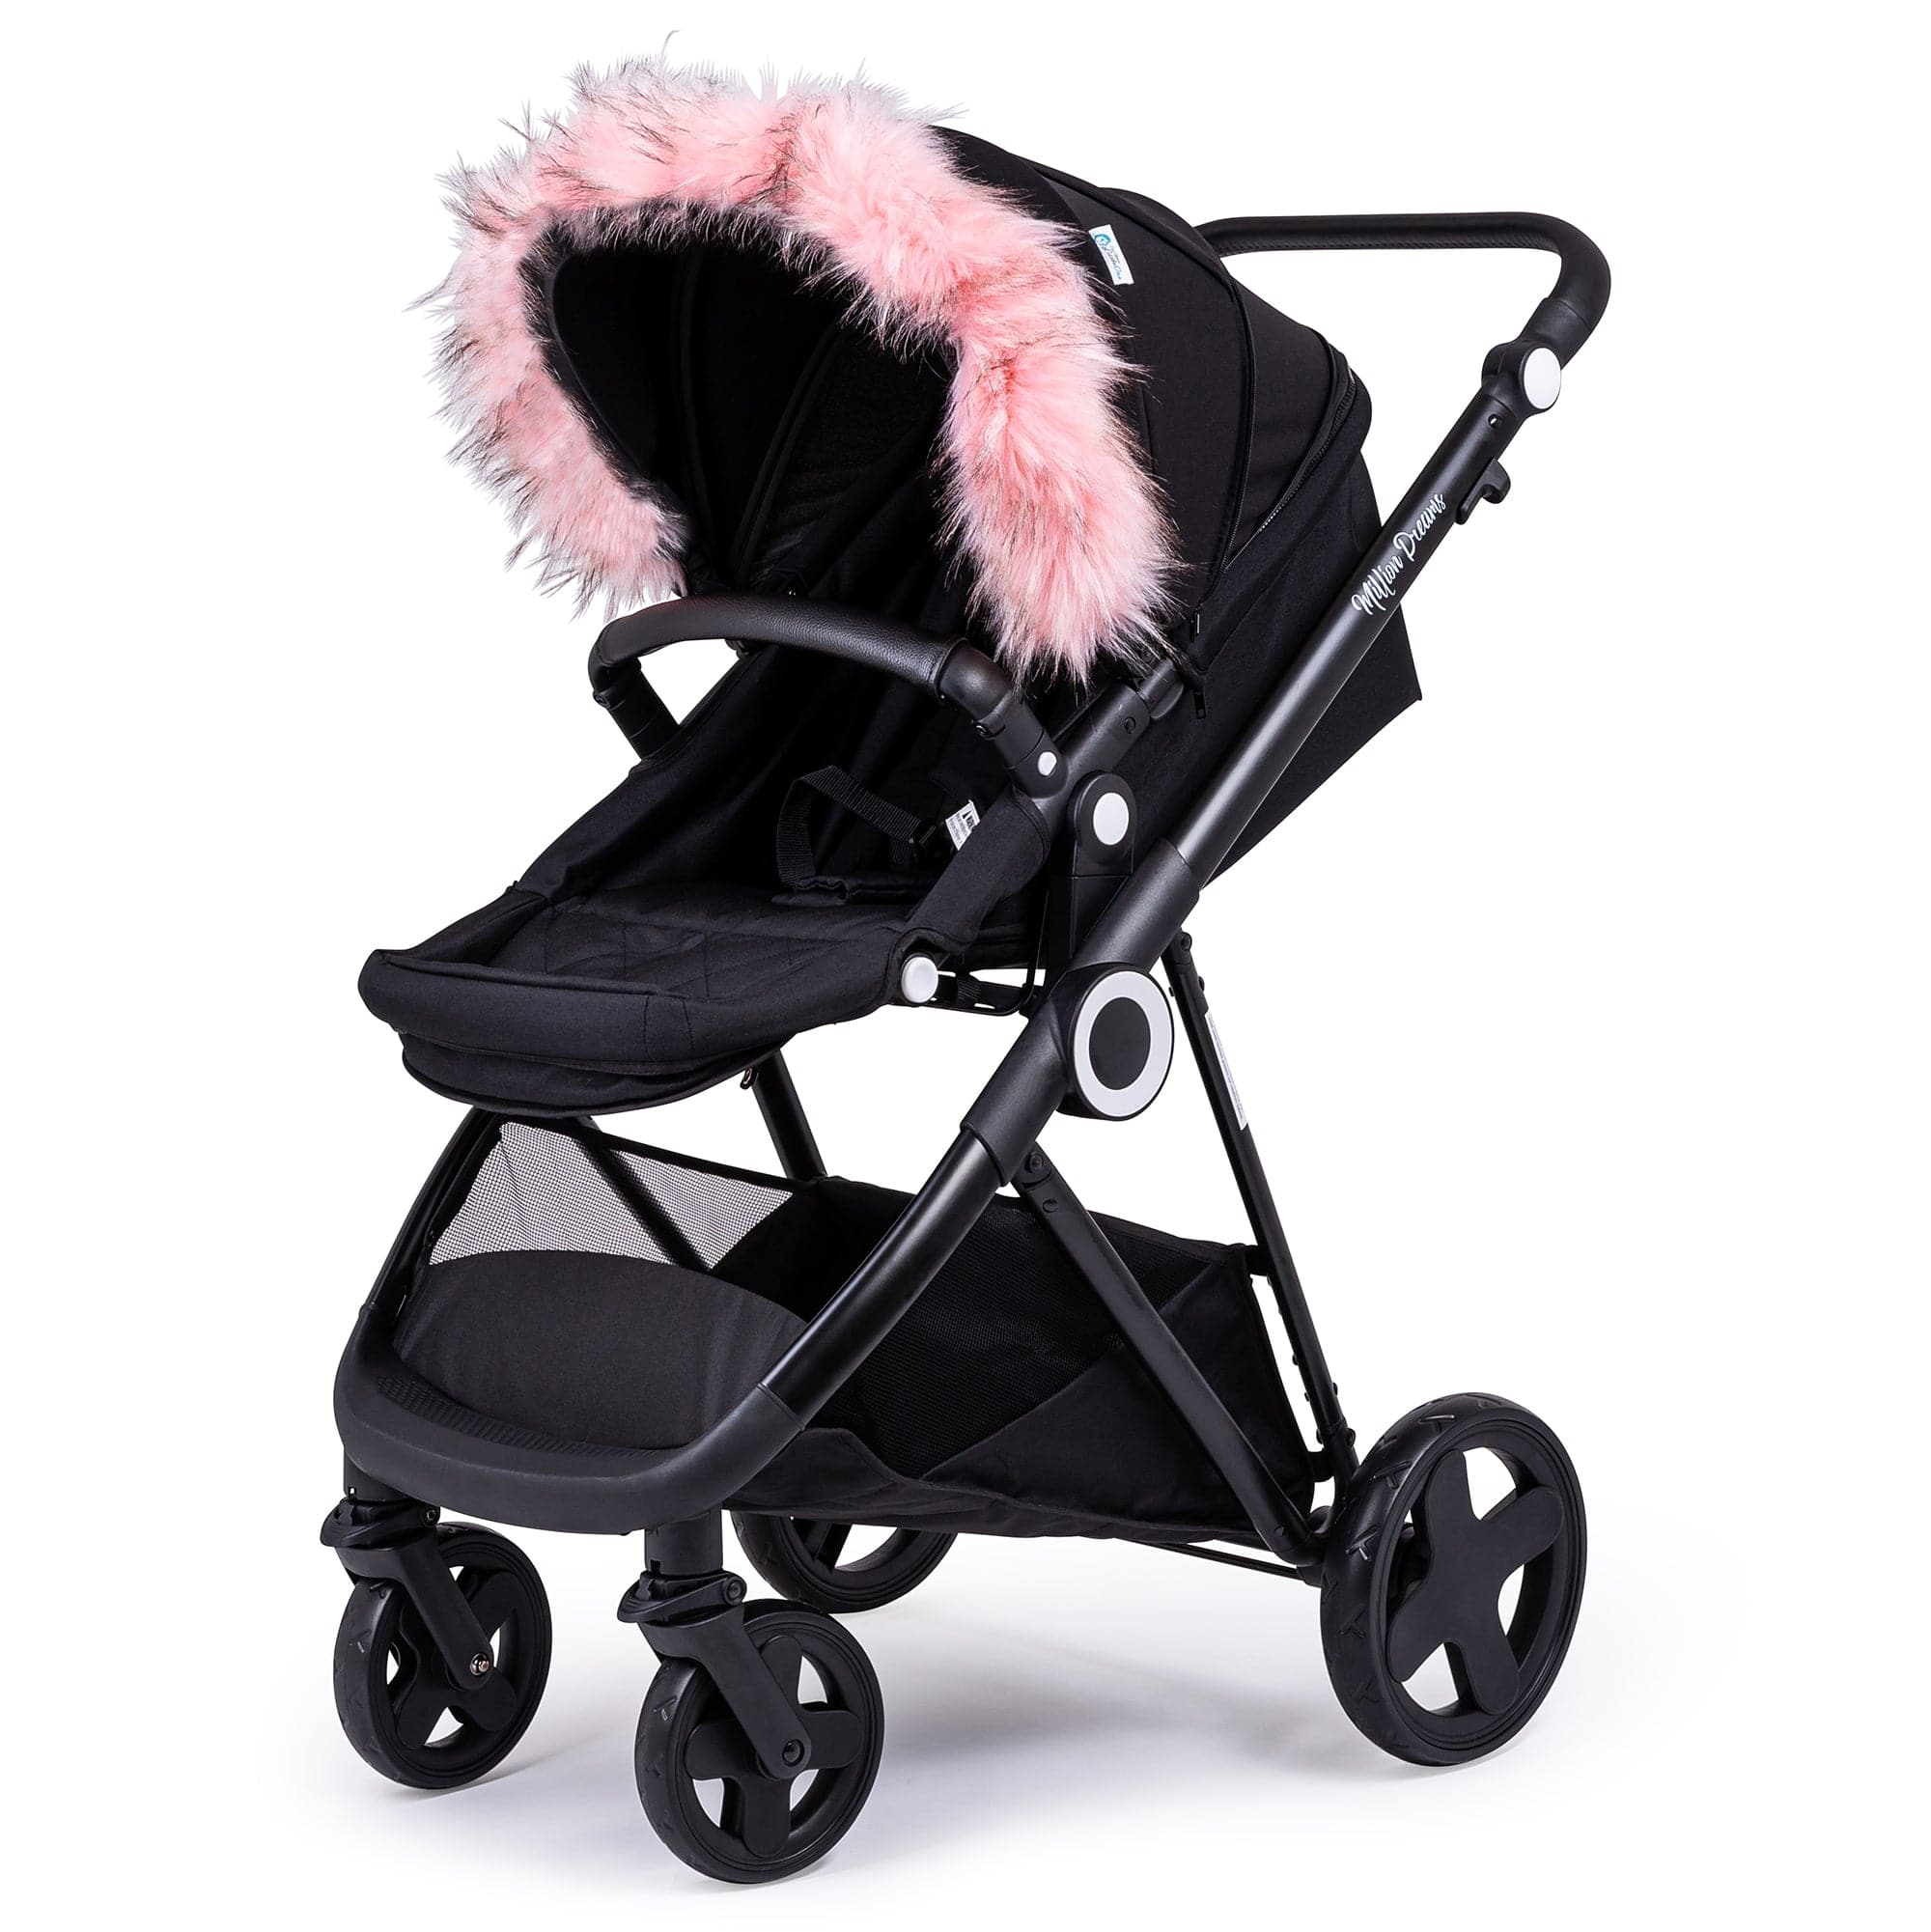 Pram Fur Hood Trim Attachment For Pushchair Compatible with Nuna - Light Pink / Fits All Models | For Your Little One